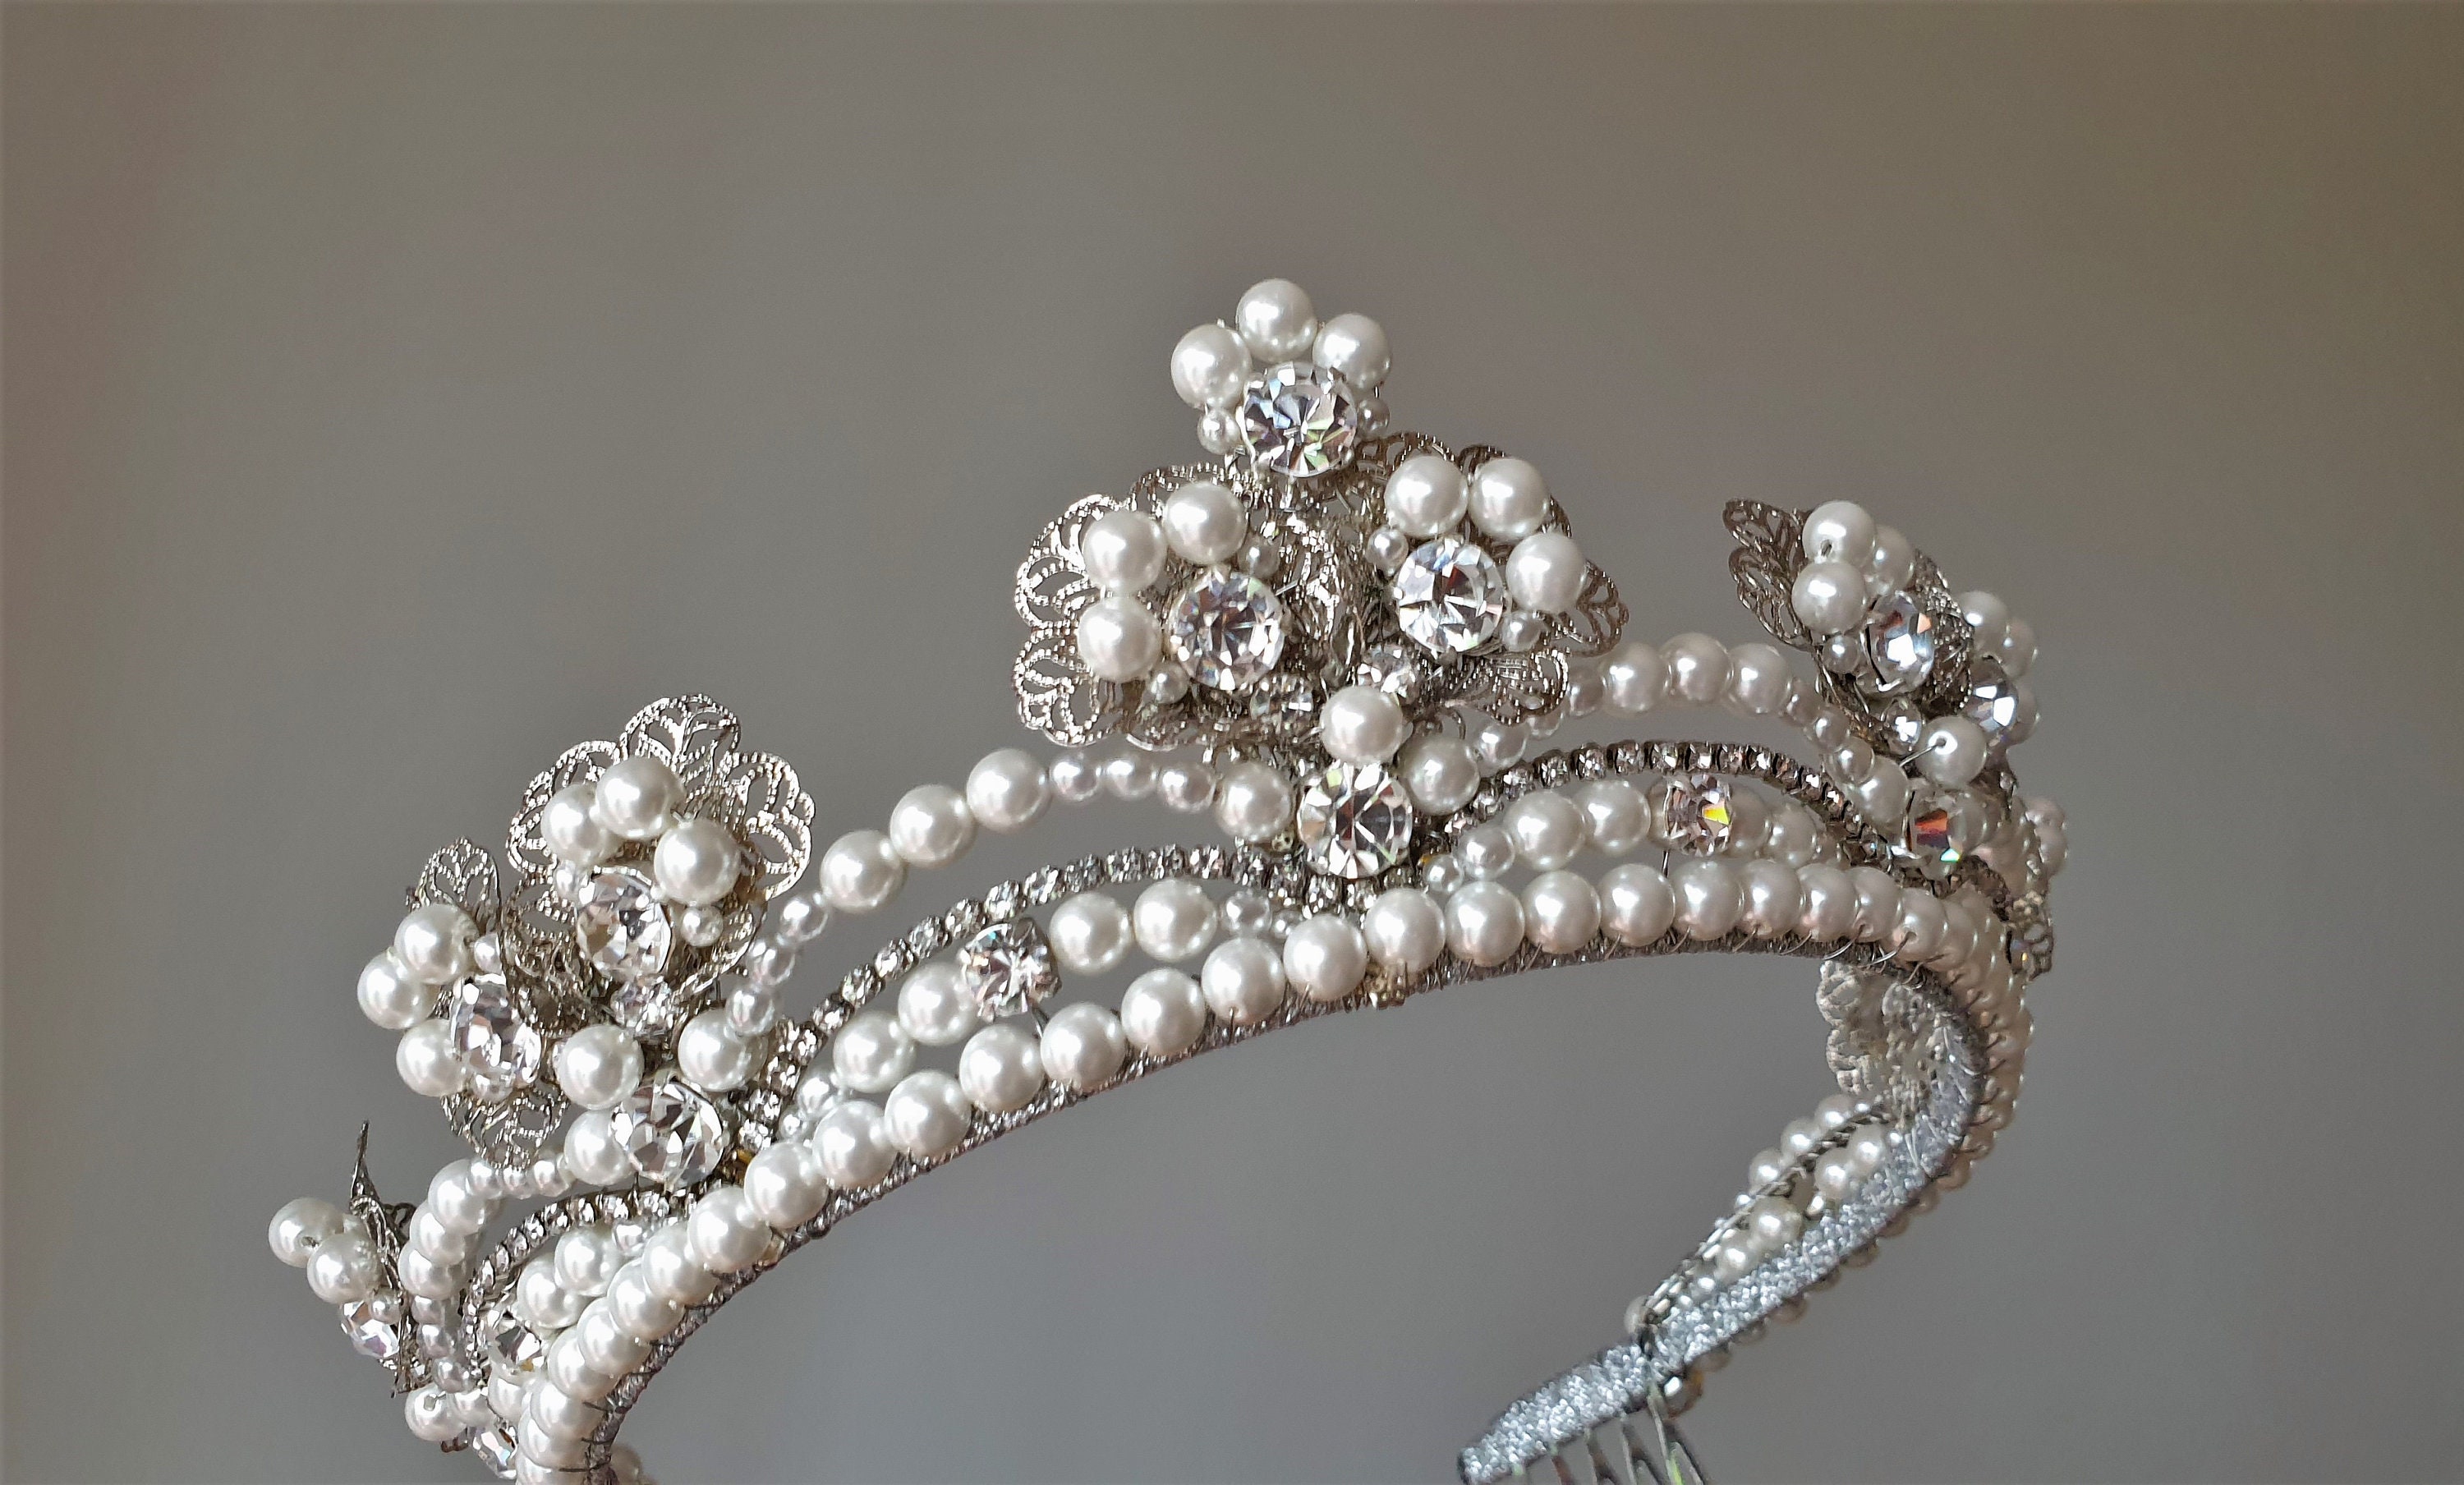 Empress Eugenie Pearl and Diamond Tiara at Louvre Museum